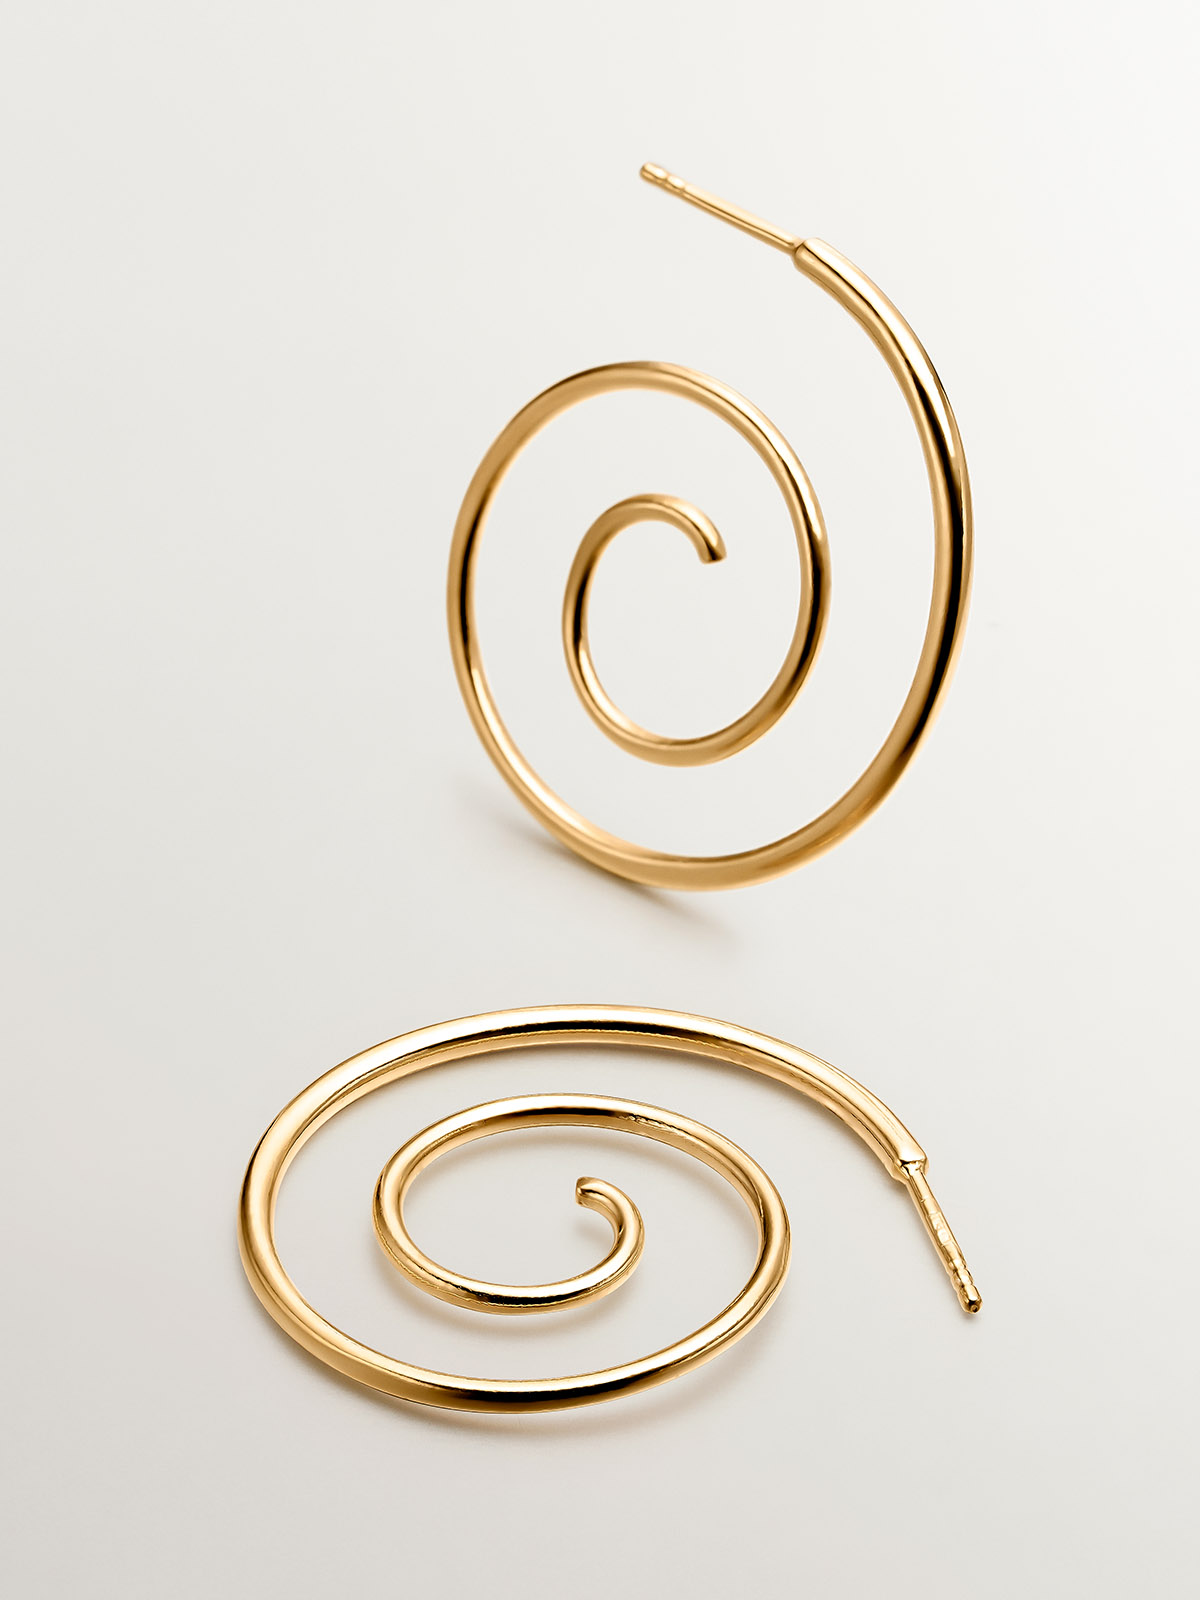 Silver spiral earrings 925 bathed in 18k yellow gold